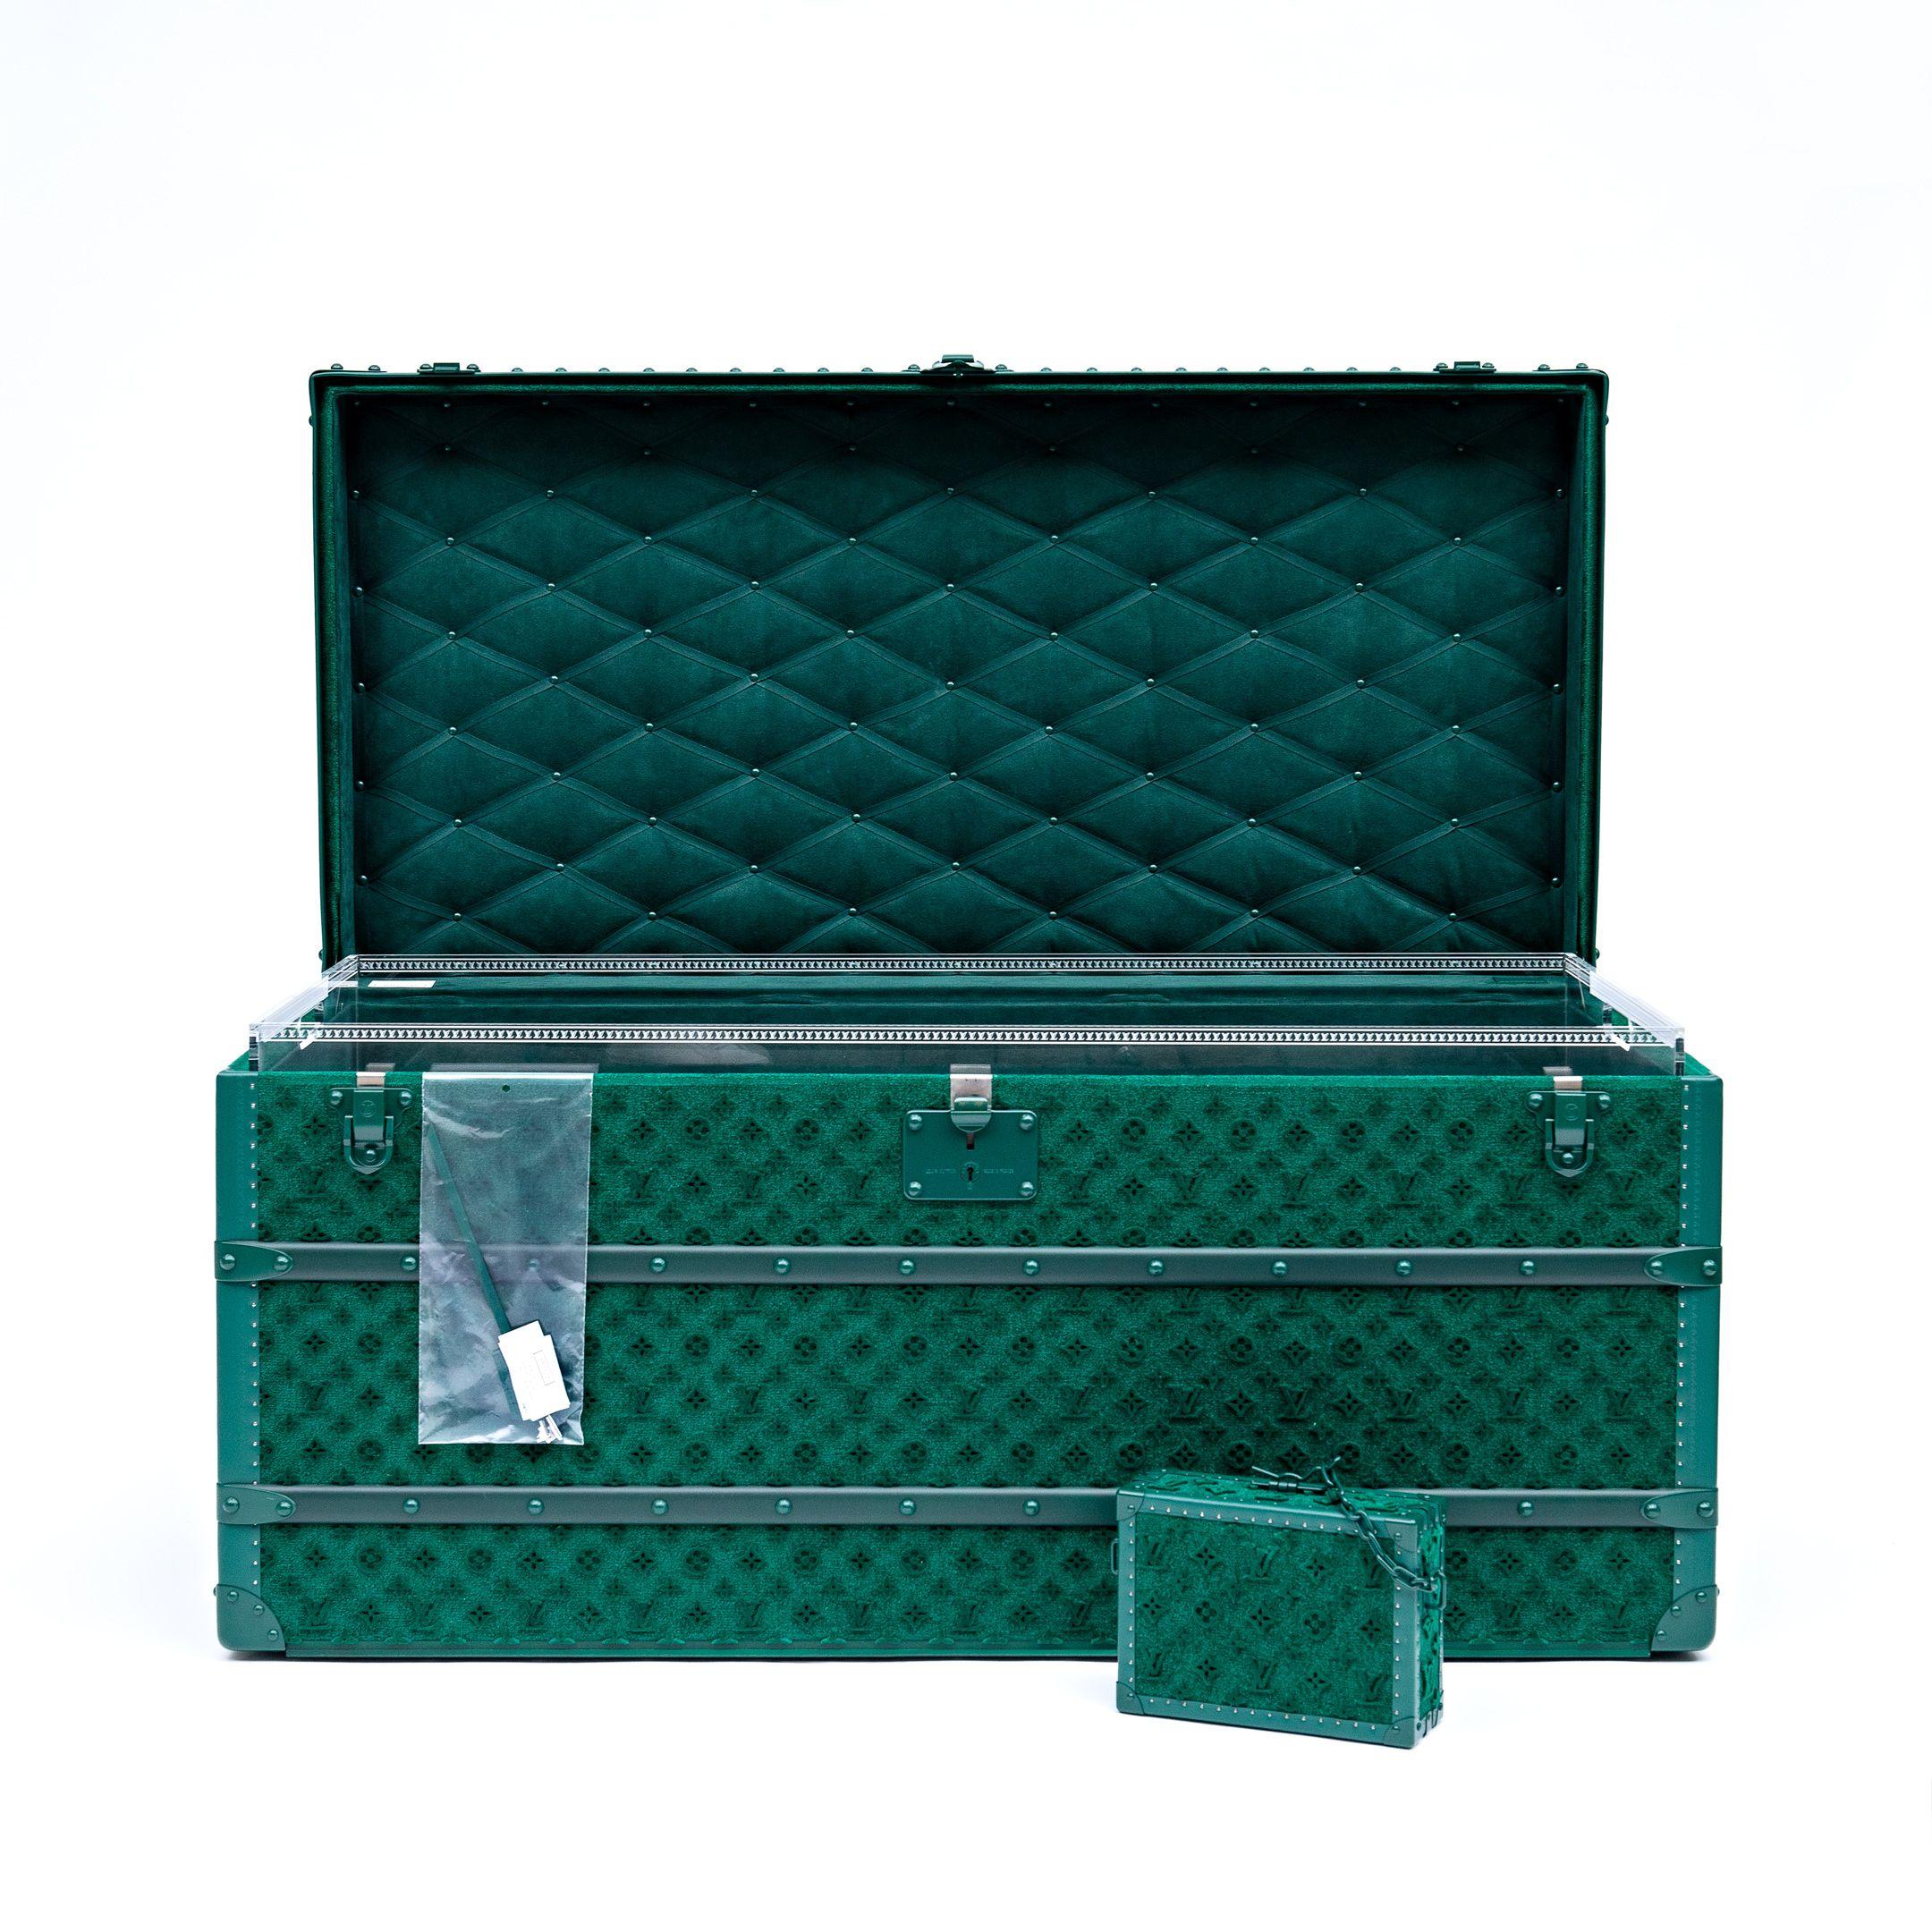 Limited Edition Green Tuffetage Monogram Wallet Trunk with Green Hardware by Virgil Abloh 
Louis Vuitton 2020
Limited Edition Wallet Trunk Inside as well (photo shown) 
23cm x 13.5 cm x 6cm 